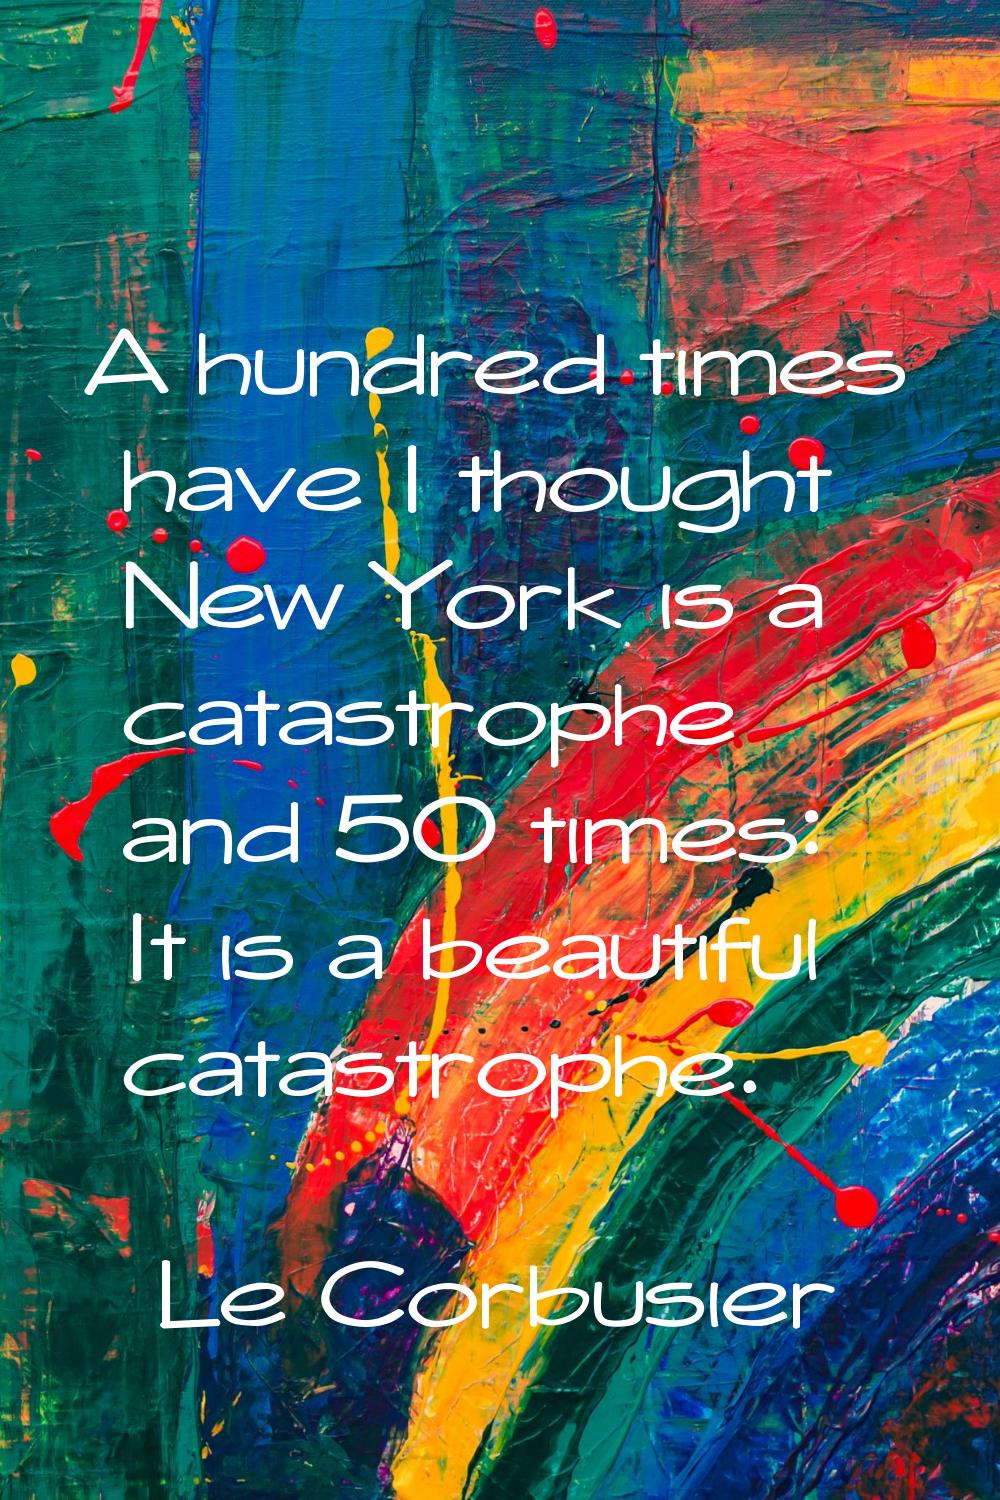 A hundred times have I thought New York is a catastrophe and 50 times: It is a beautiful catastroph